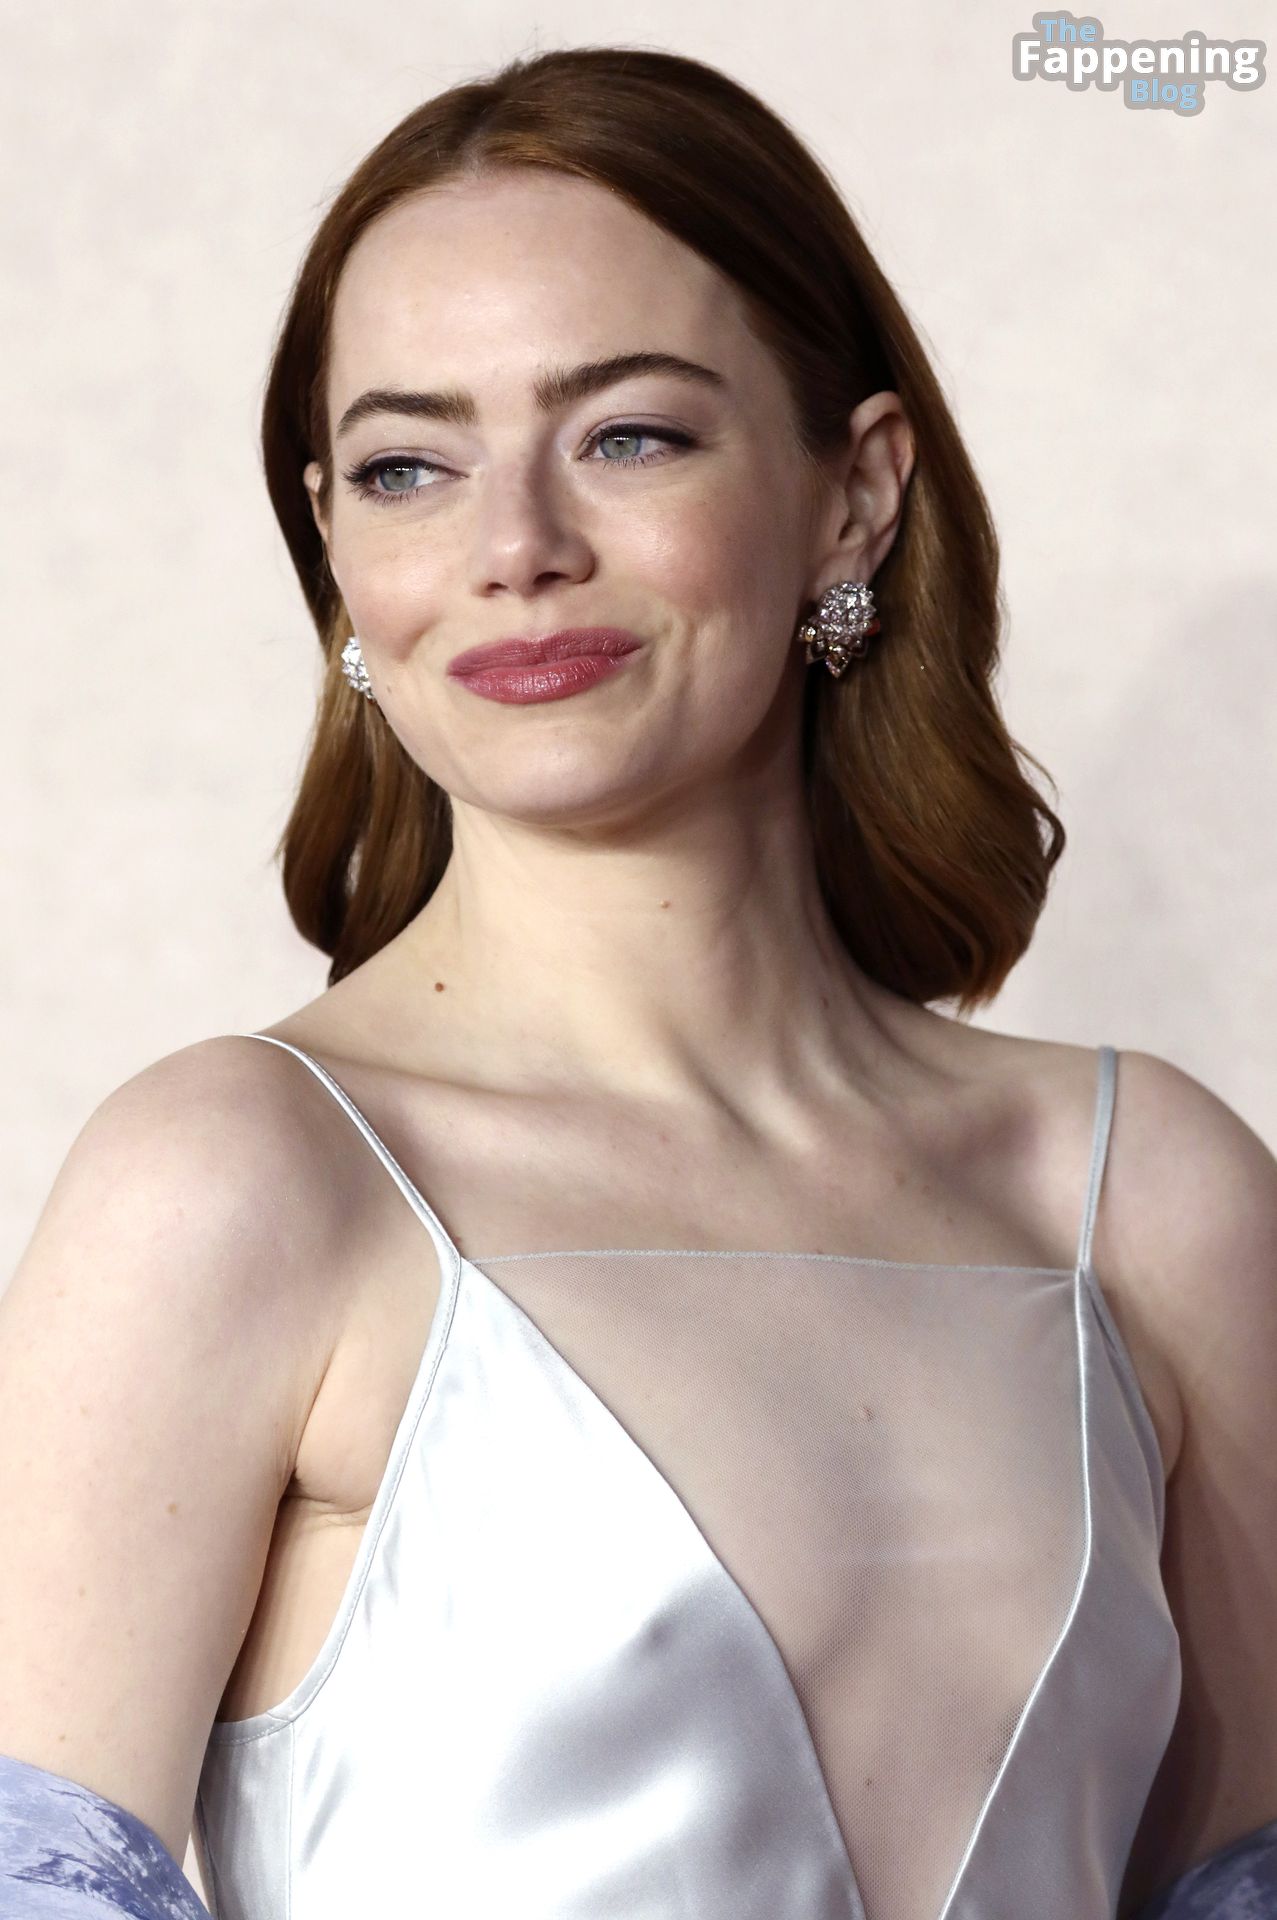 Emma Stone Looks Stunning at the “Poor Things” Premiere in London (82 Photos)